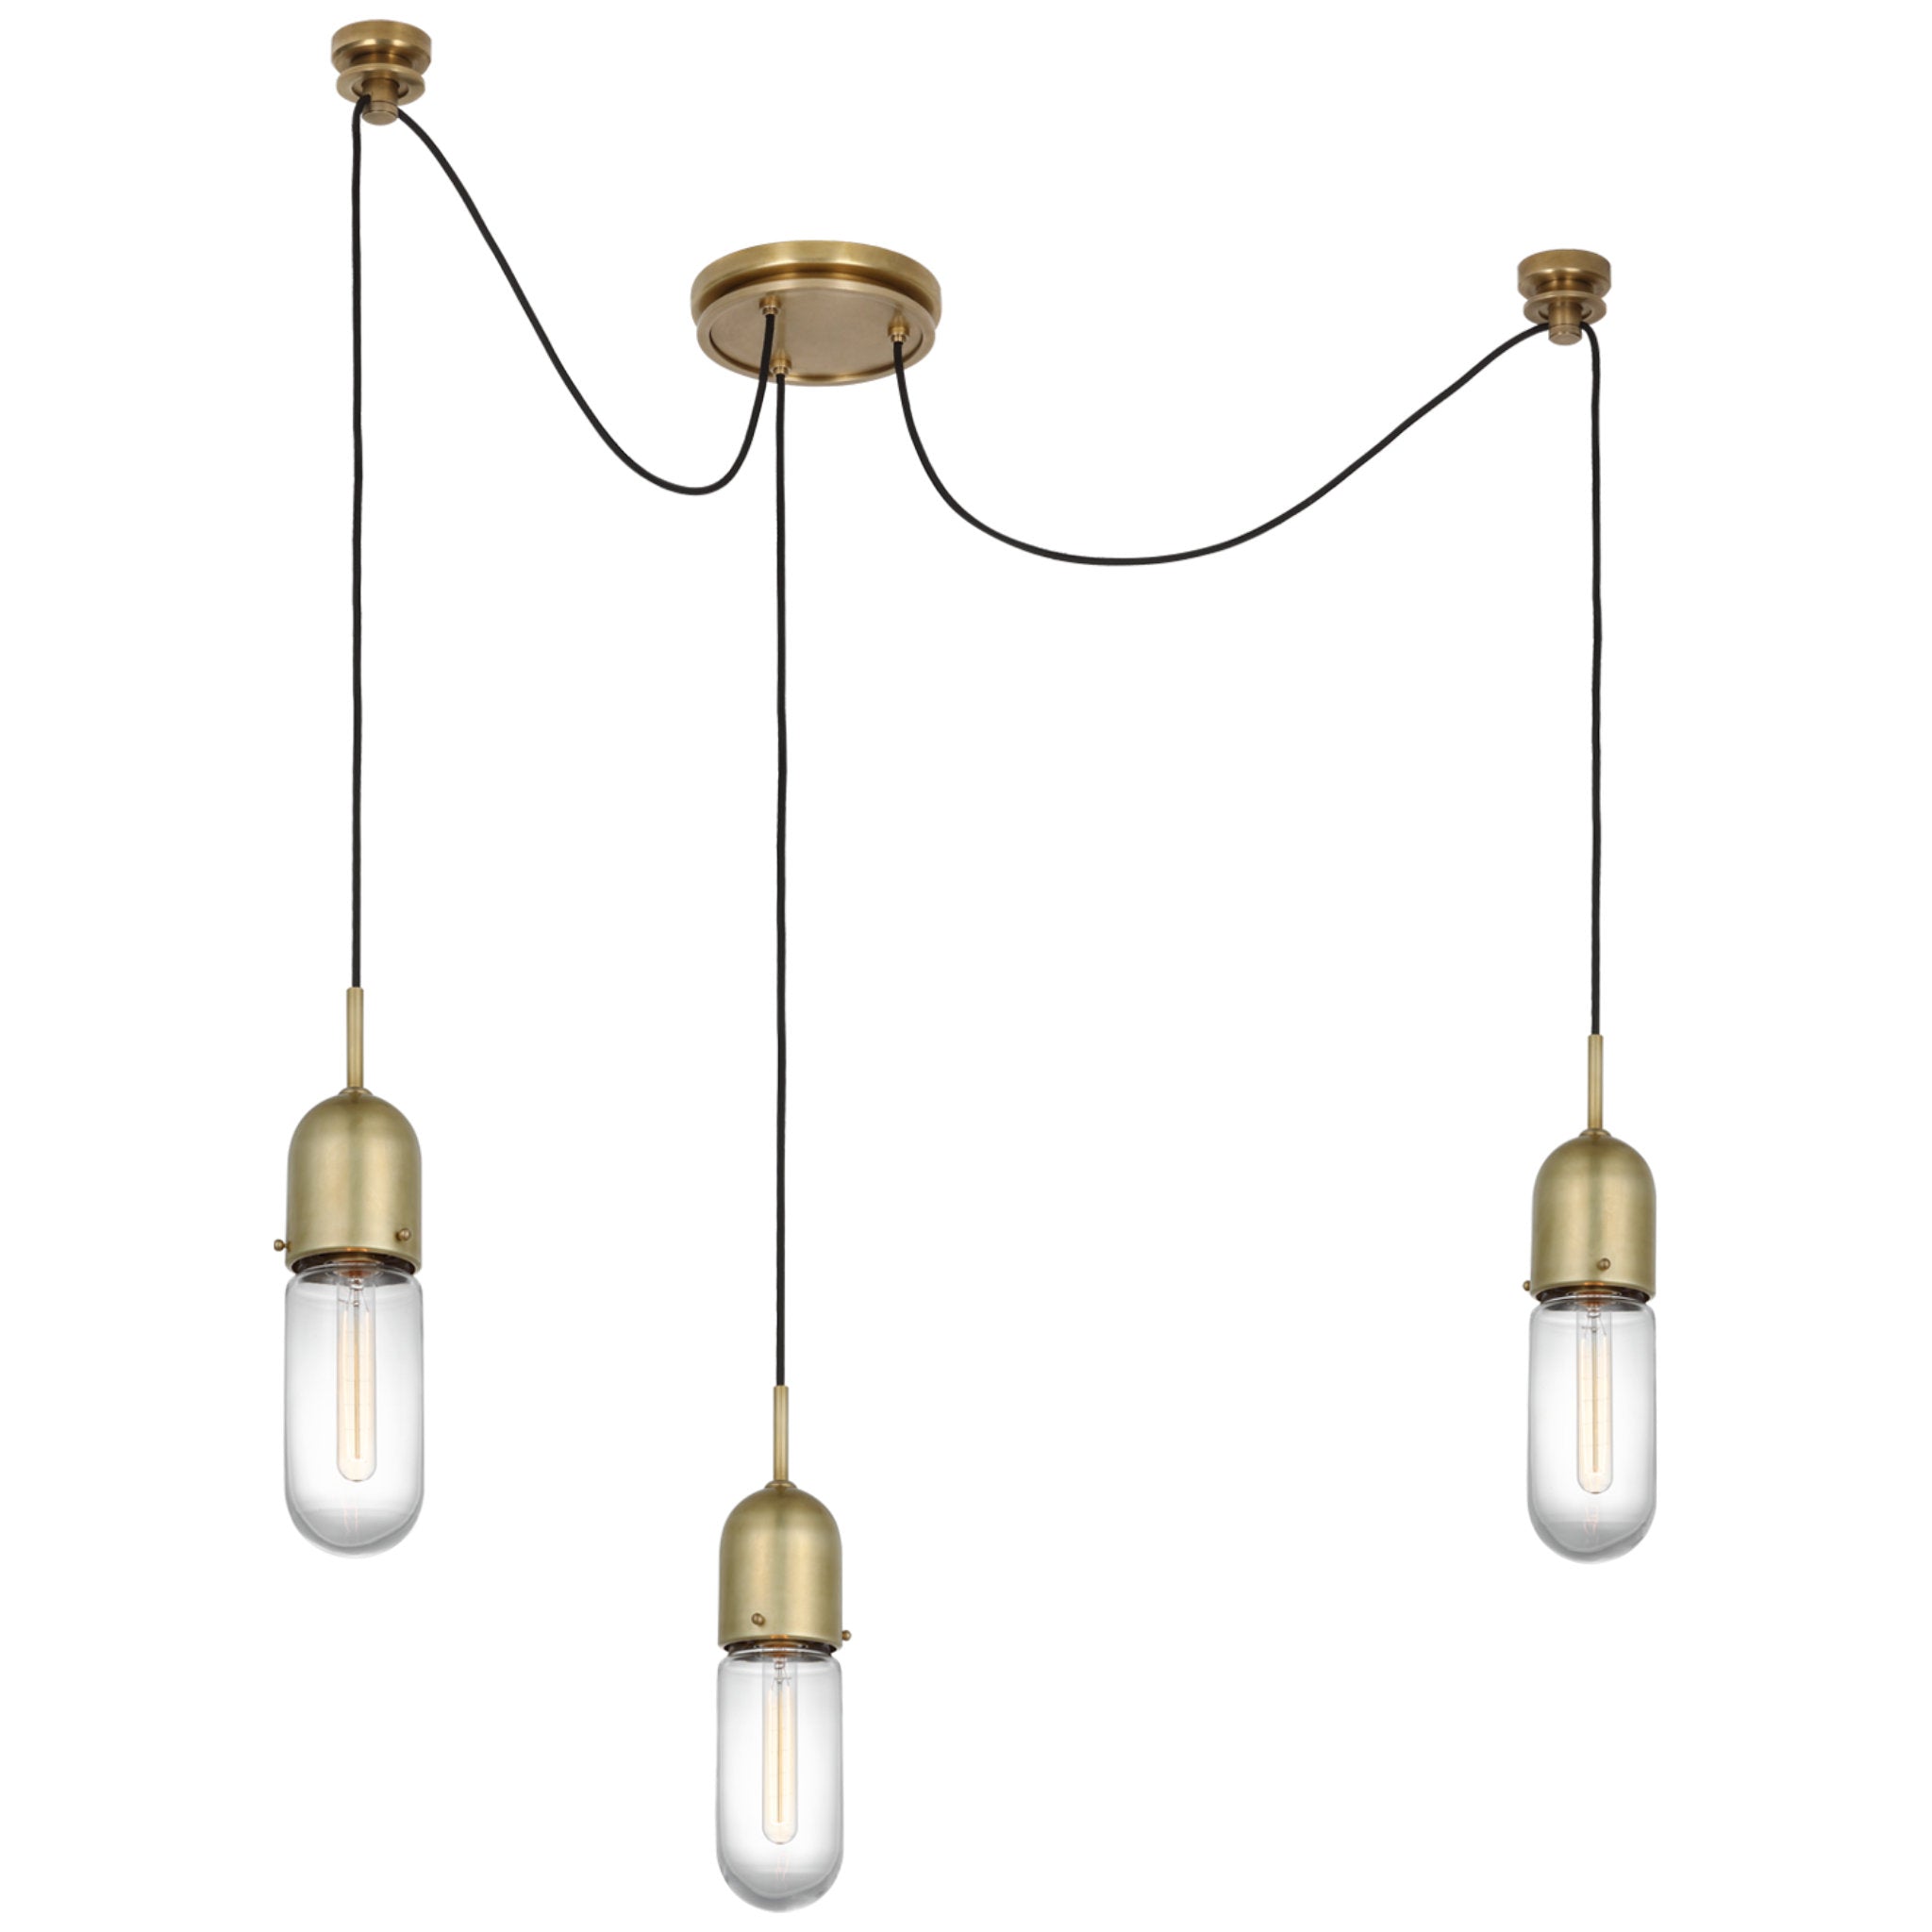 Thomas O'Brien Junio 3-Light Chandelier in Hand-Rubbed Antique Brass with Clear Glass